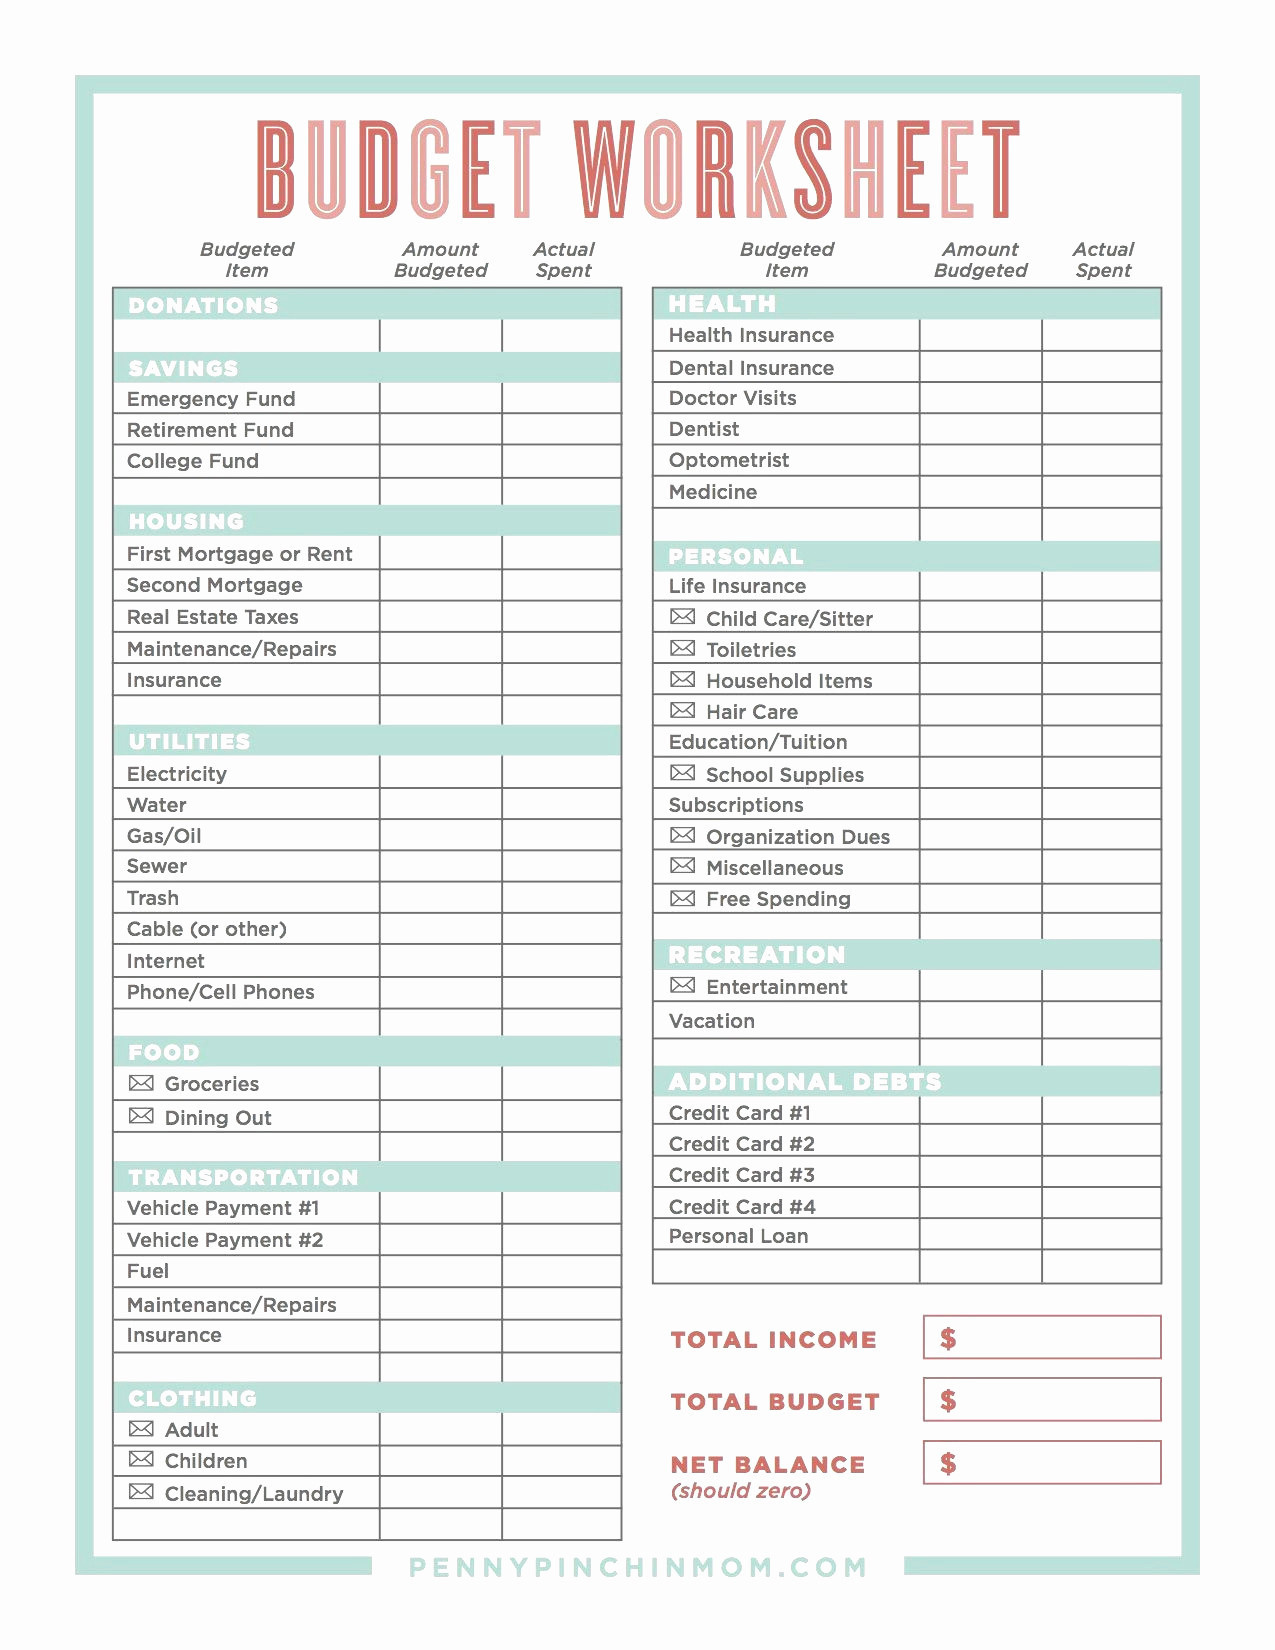 Assets and Liabilities Worksheet asset and Liability Worksheet